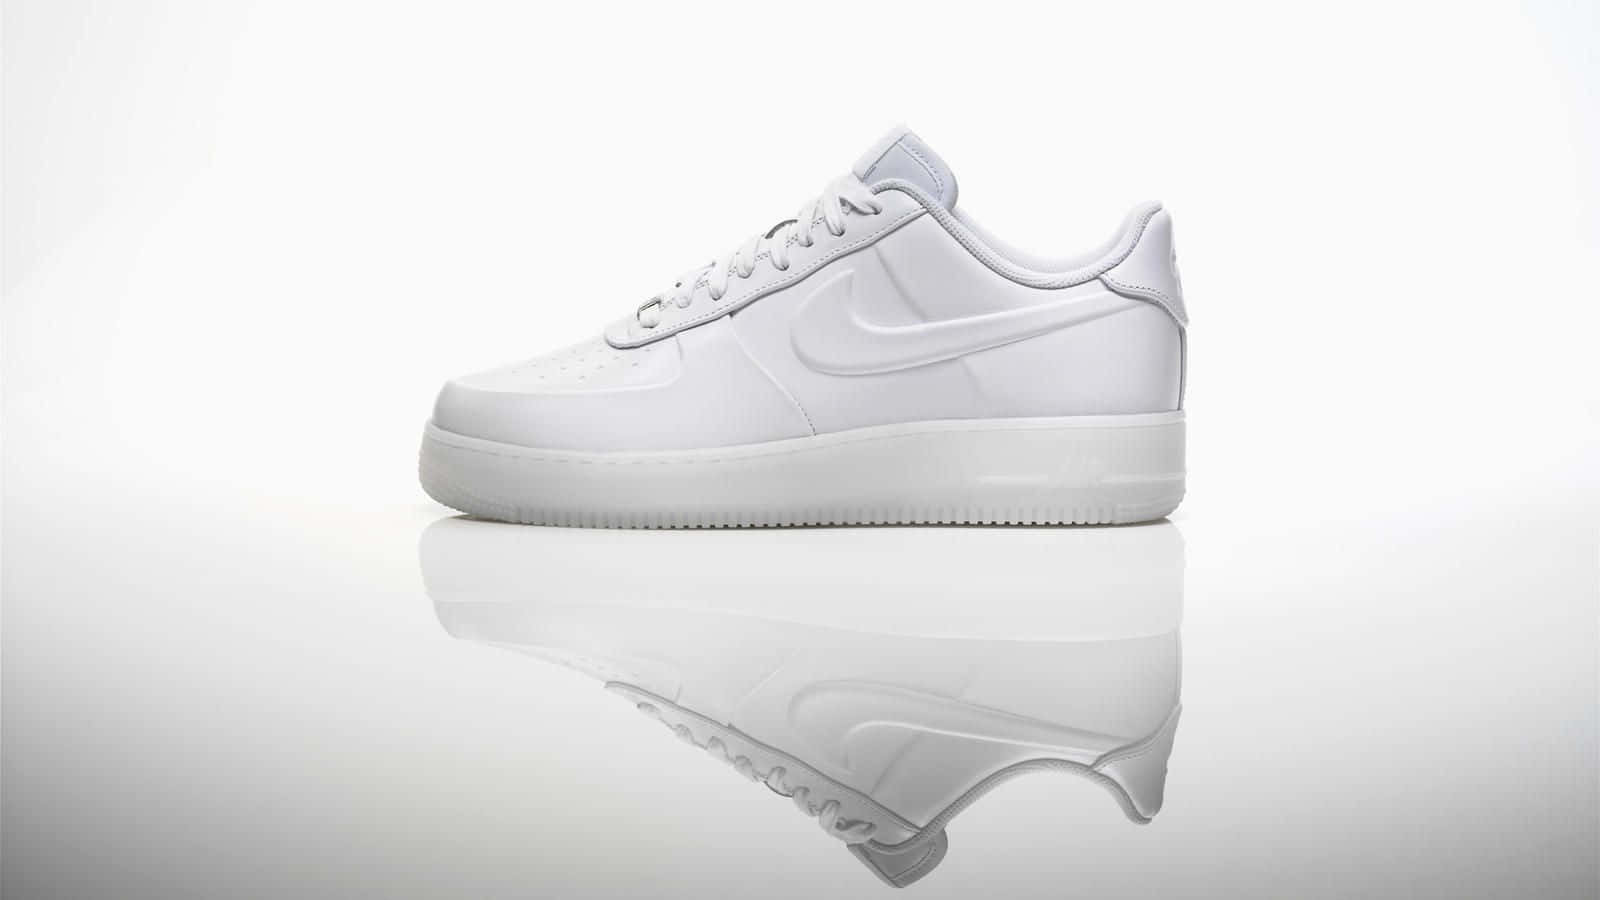 Step into Something Fresh - the Nike AF1 Wallpaper